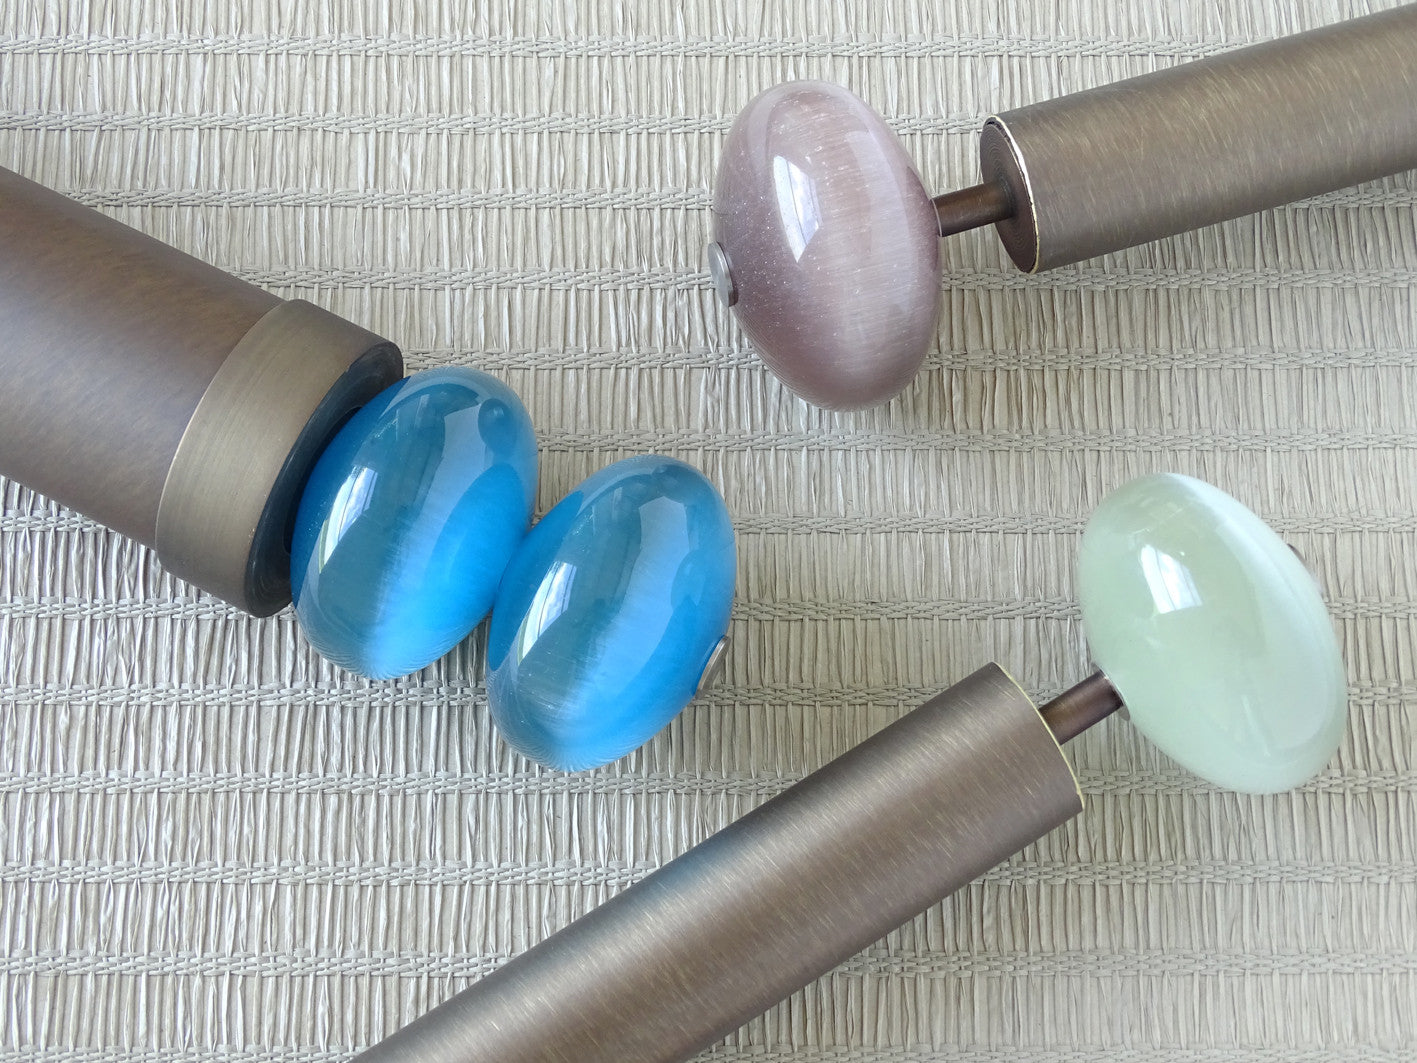 30mm diameter brushed bronze curtain pole collection with opal moonstone finials, antique brass curtain pole, traditional, classic, modern